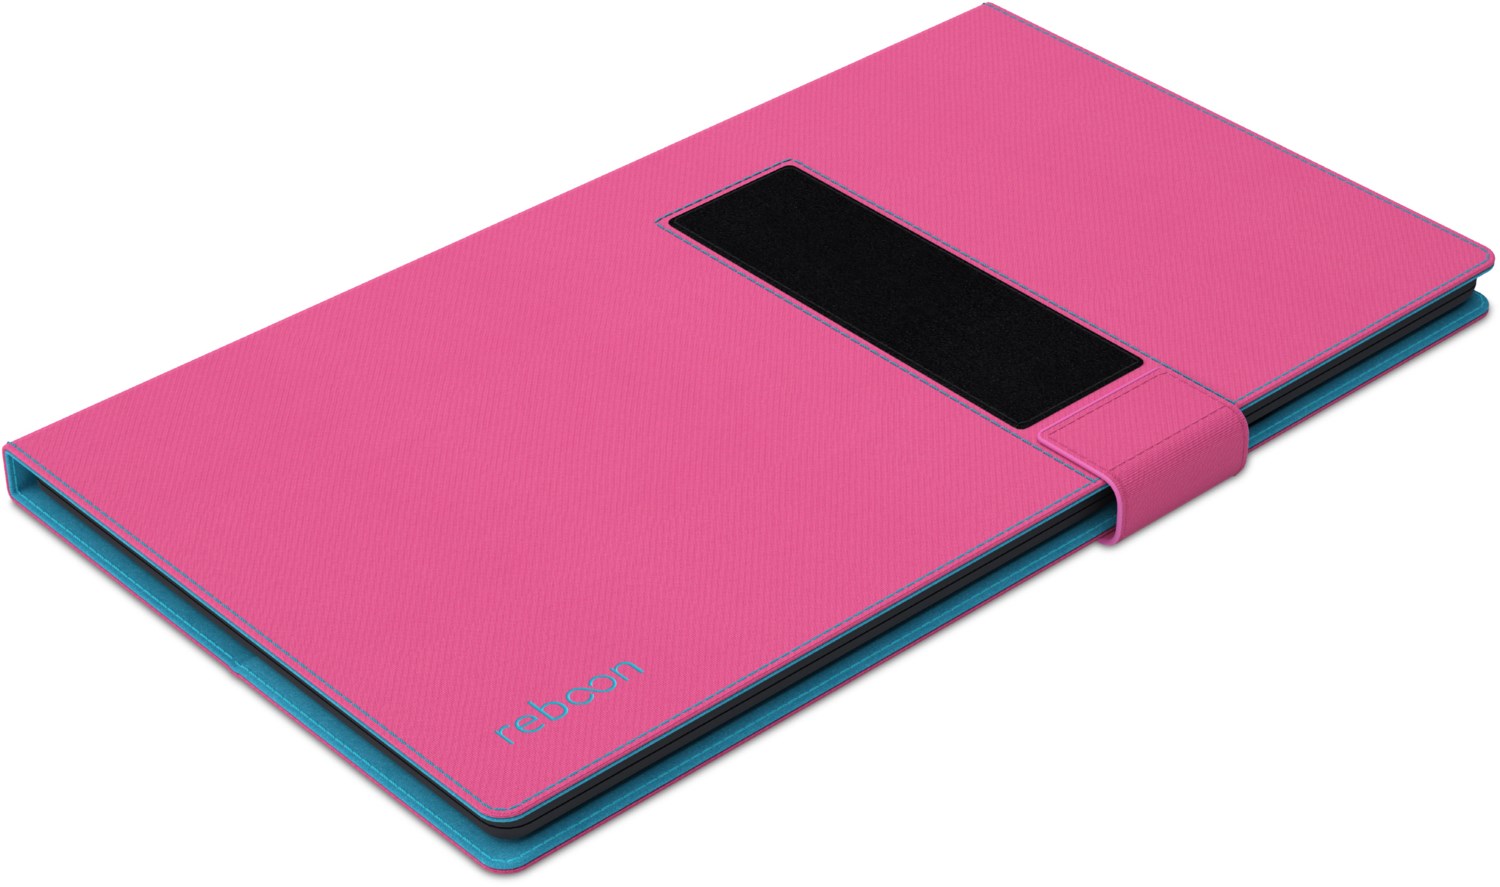 reboon booncover l2 tablethÃ¼lle pink